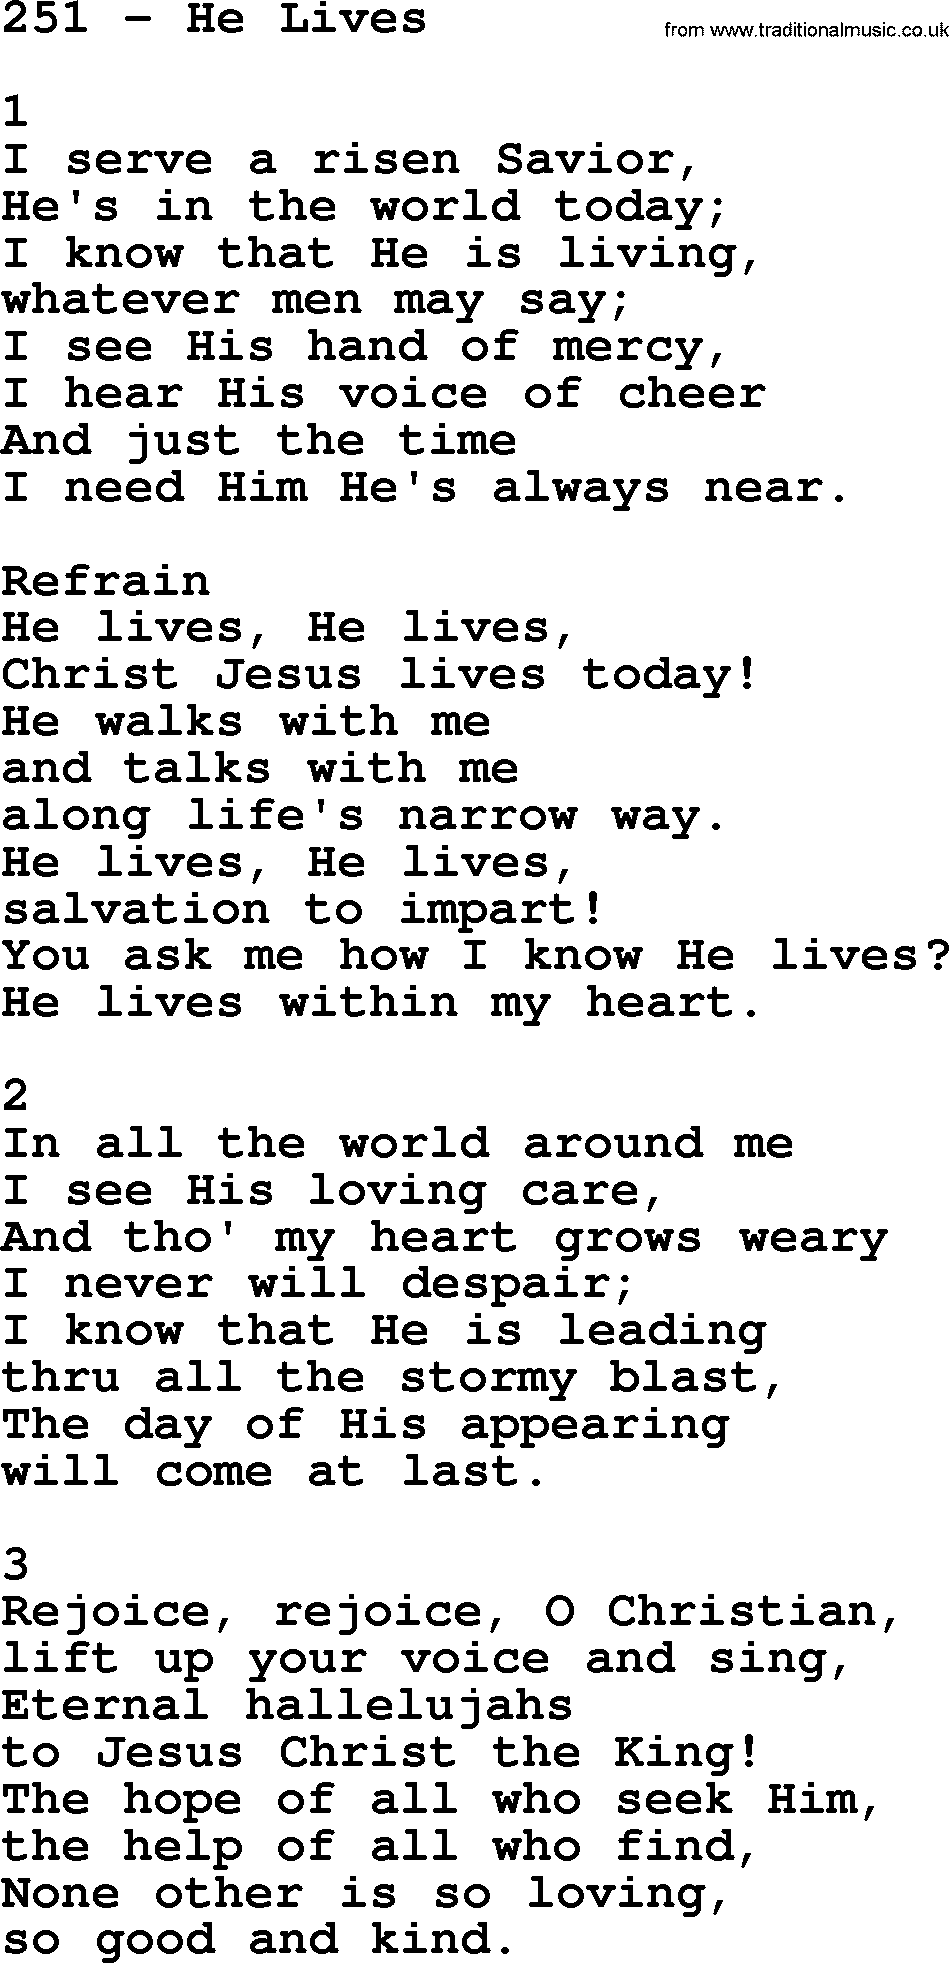 Complete Adventis Hymnal, title: 251-He Lives, with lyrics, midi, mp3, powerpoints(PPT) and PDF,